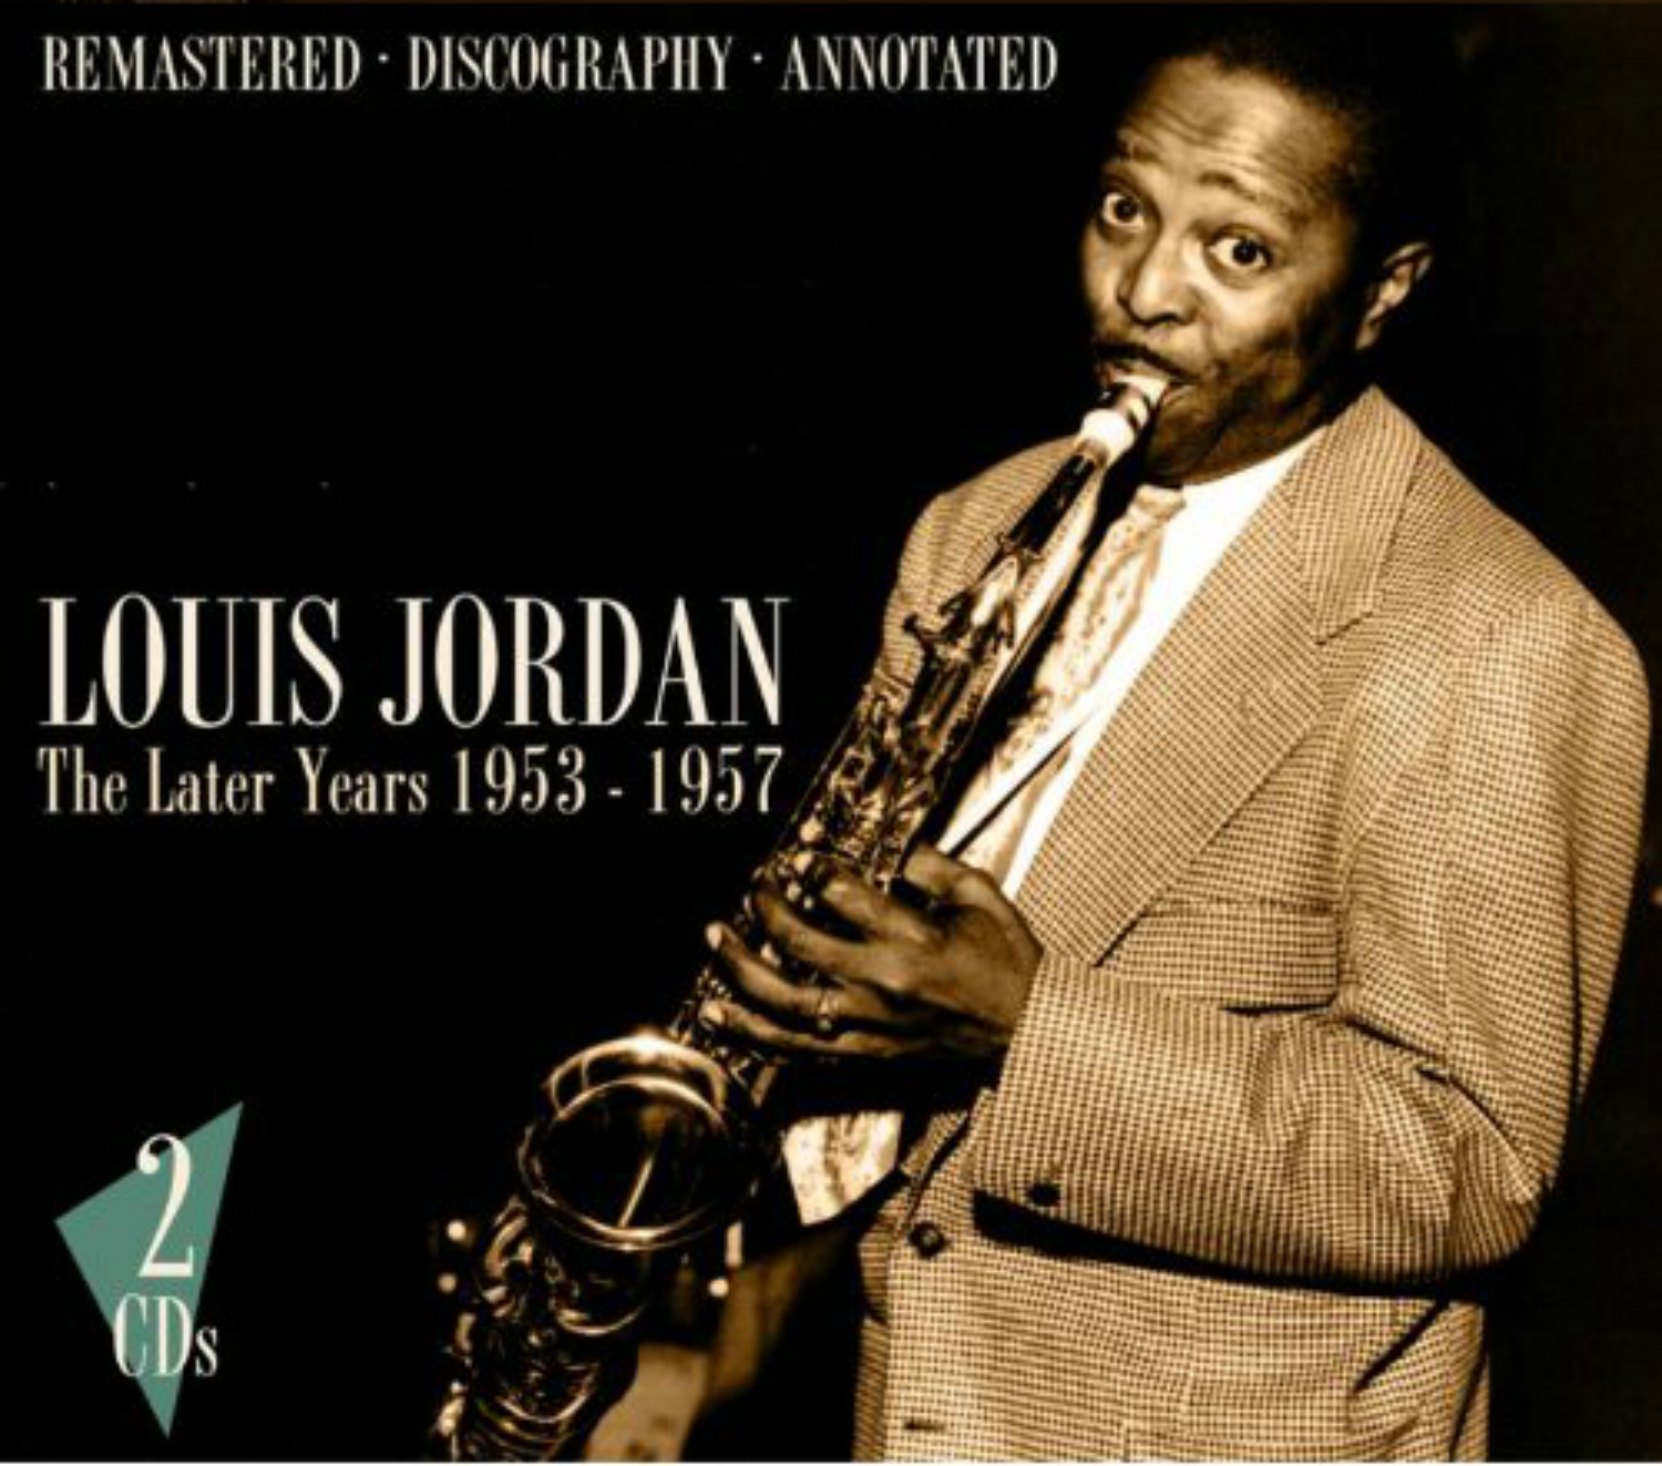 CD cover, Louis Jordan - The Later Years 1953-57, a 2 CD set on JSP Records